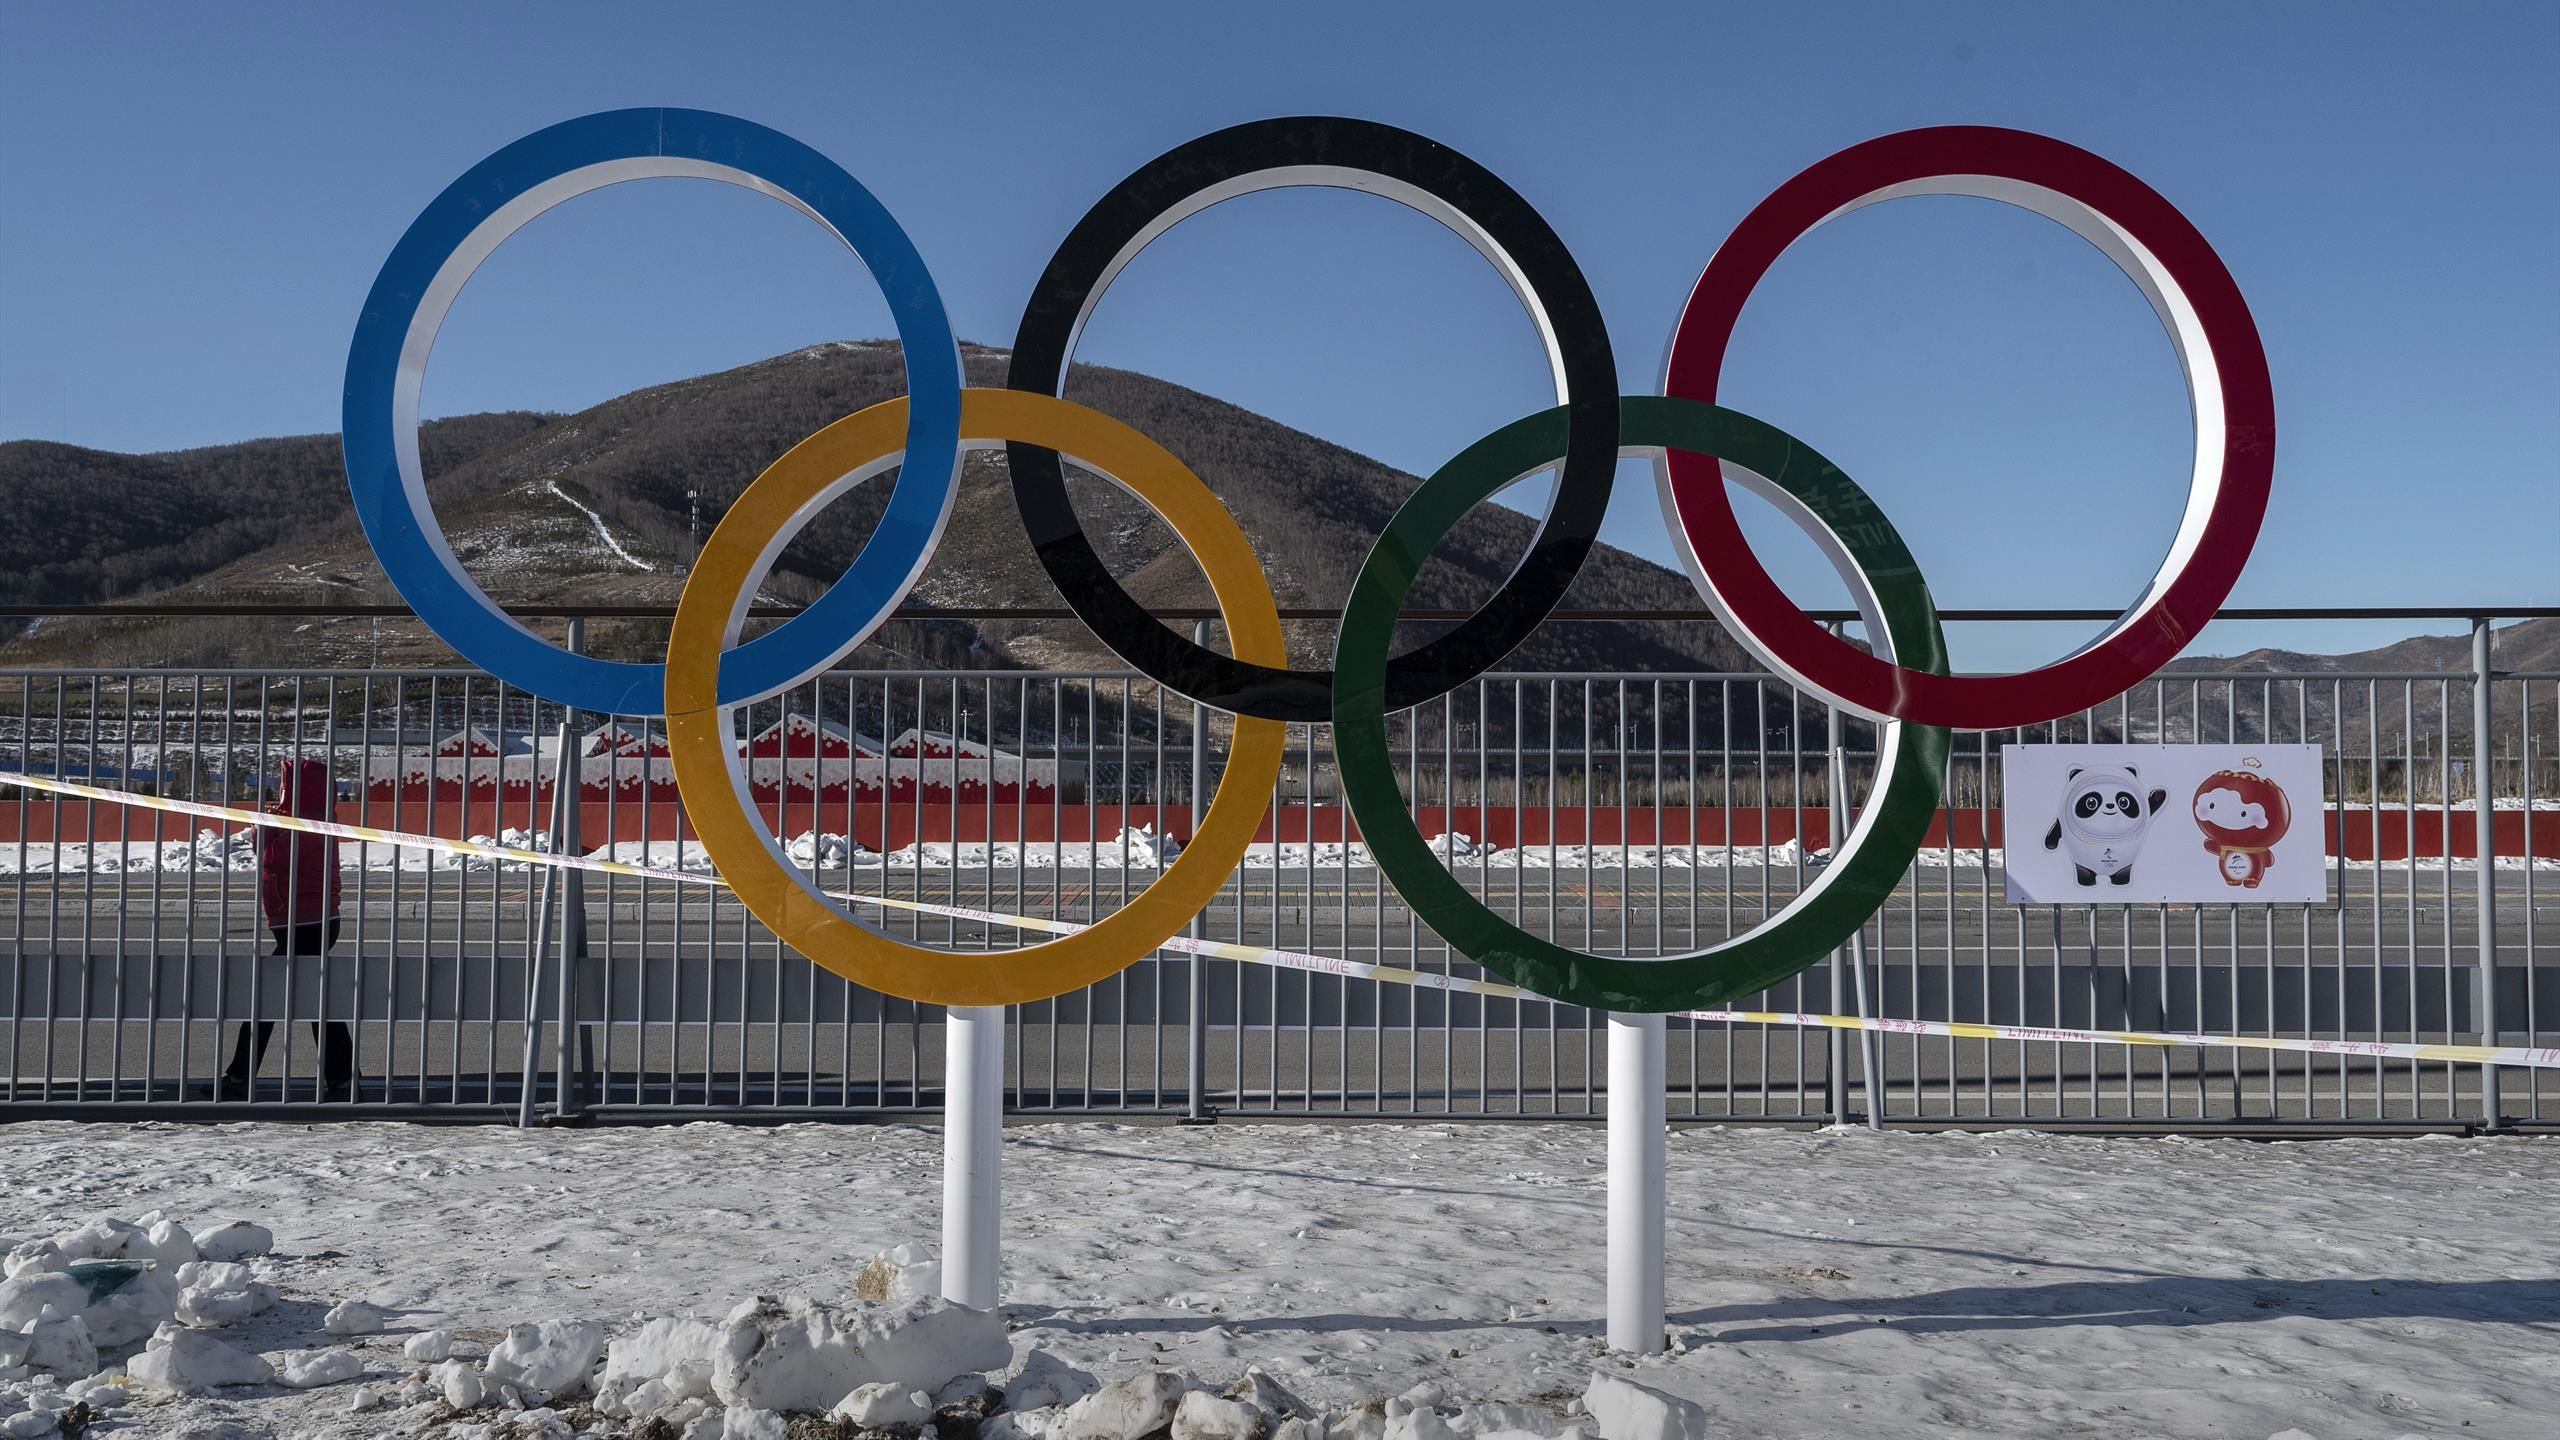 China will no longer sell tickets to the Beijing Winter Olympics due to  COVID-19 : NPR